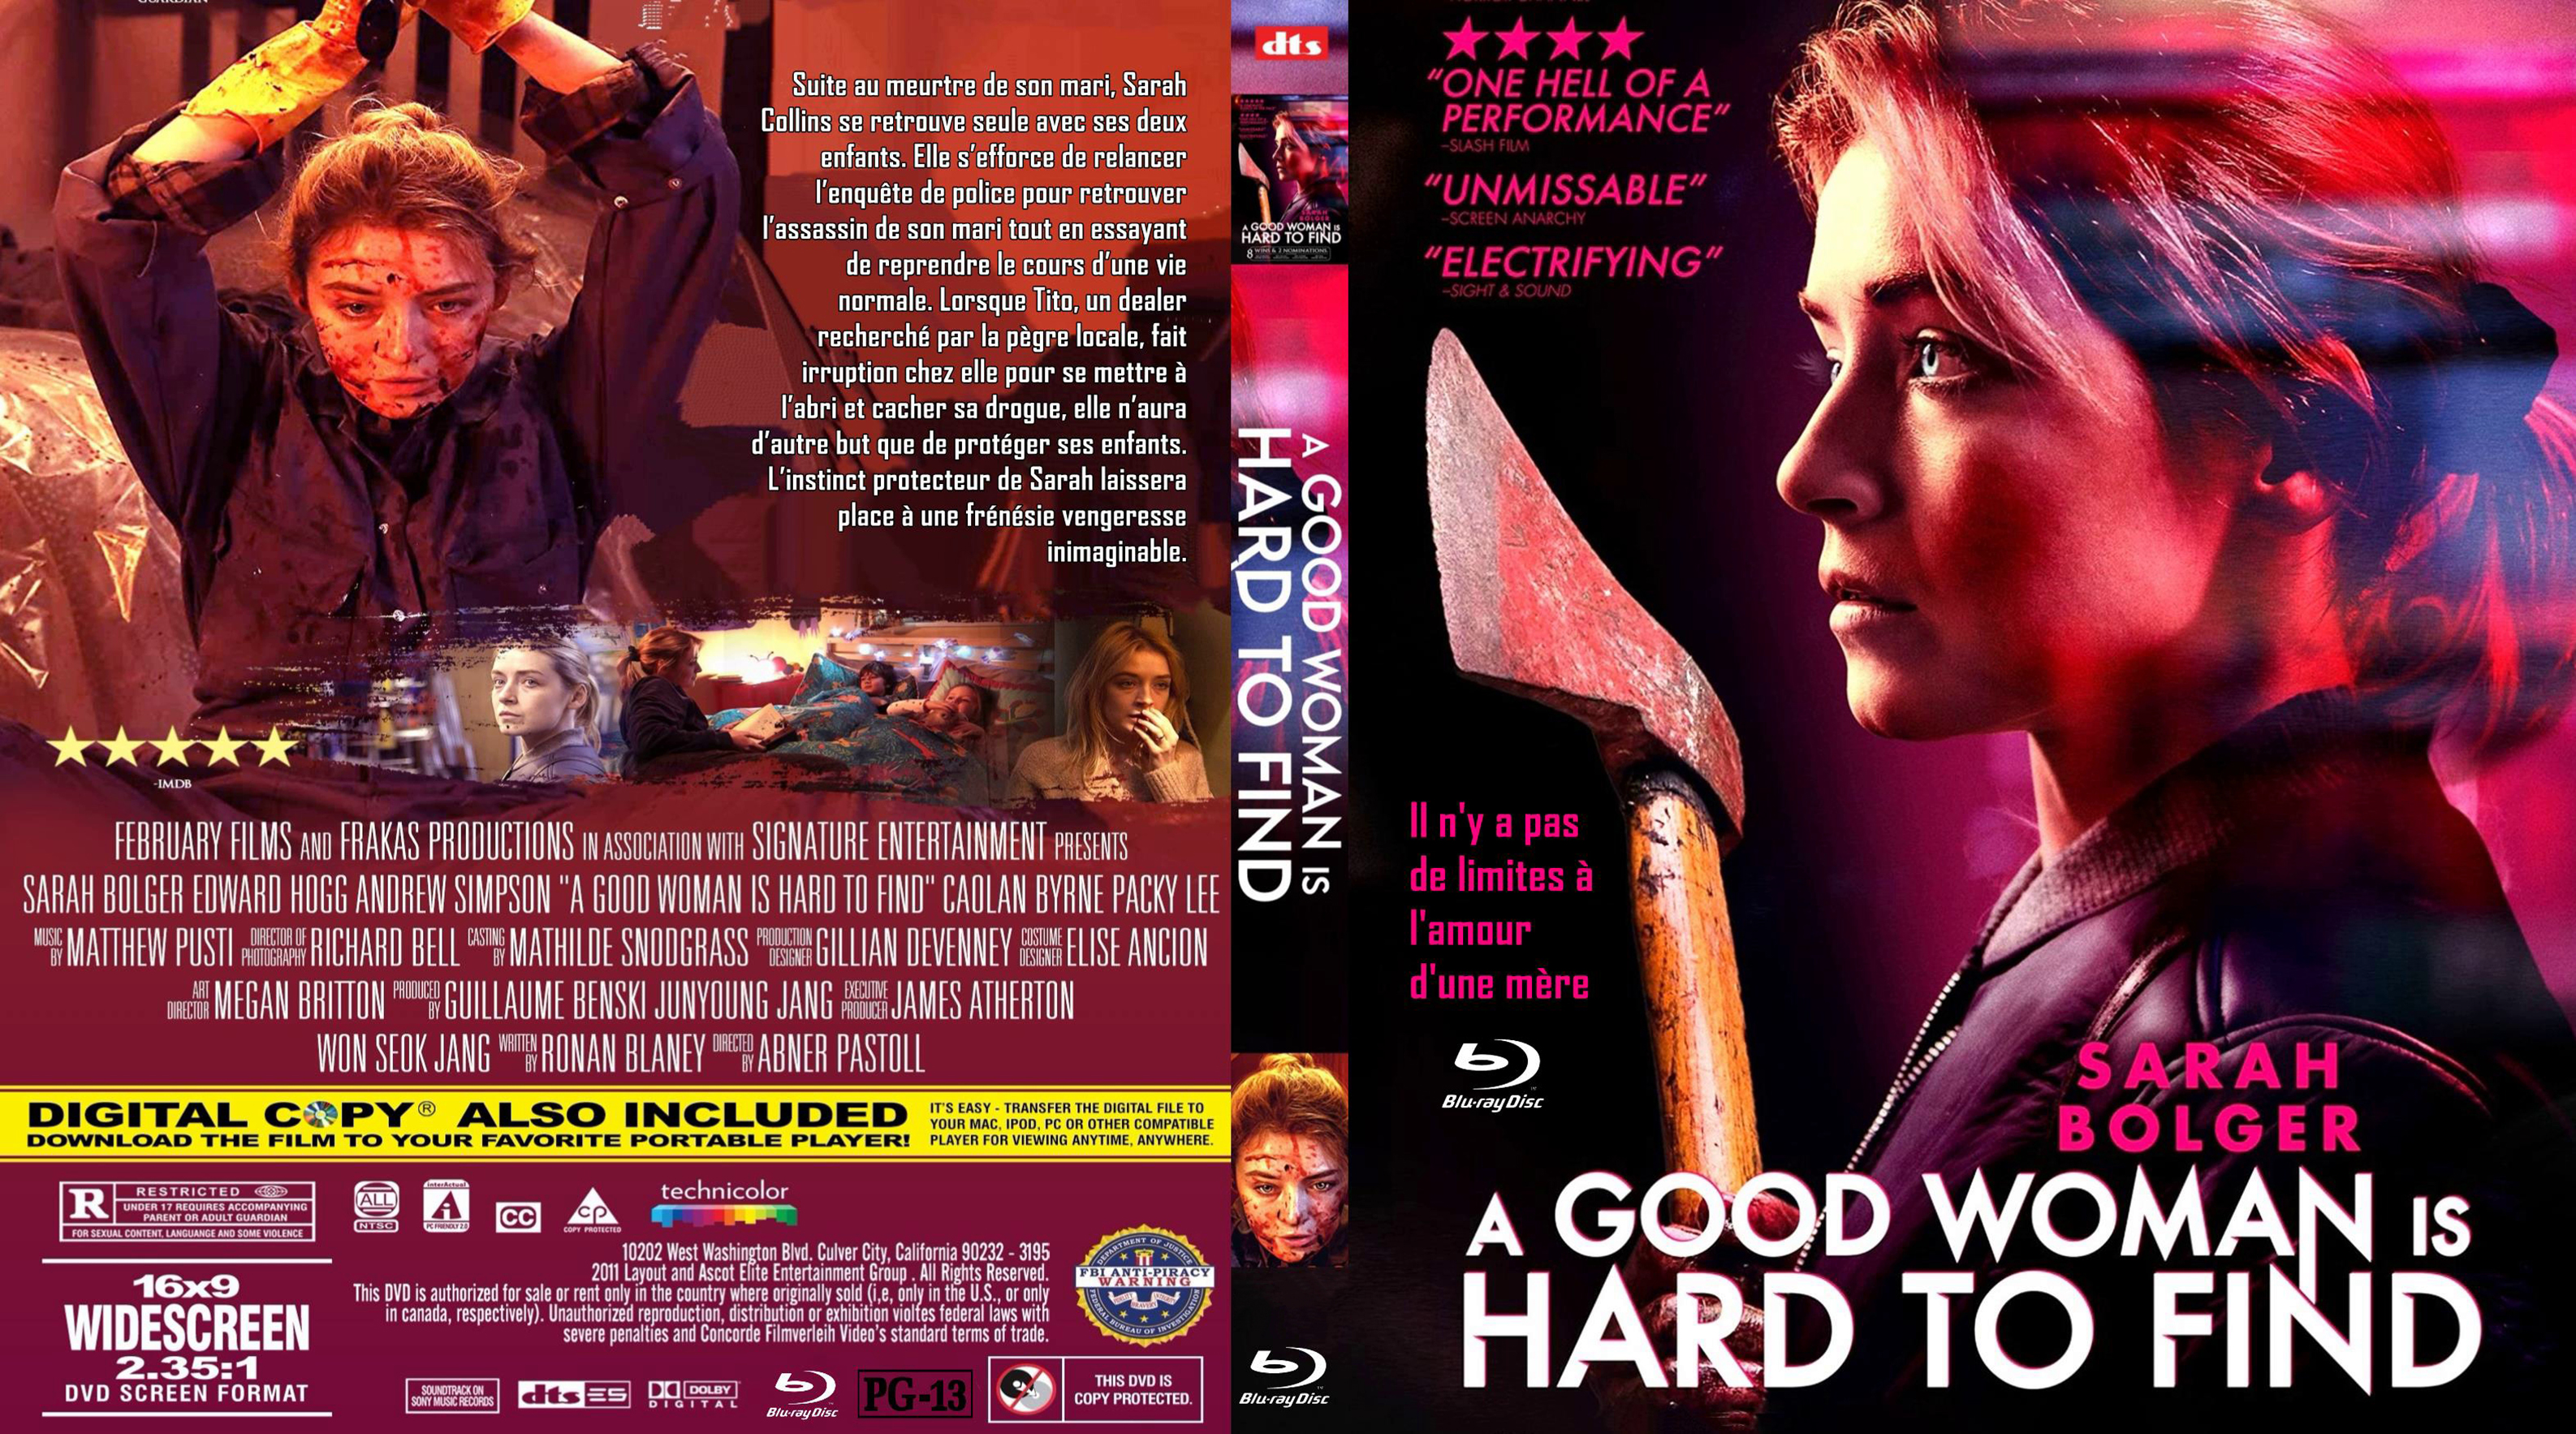 Jaquette DVD A good woman is hard to find custom (BLU-RAY)